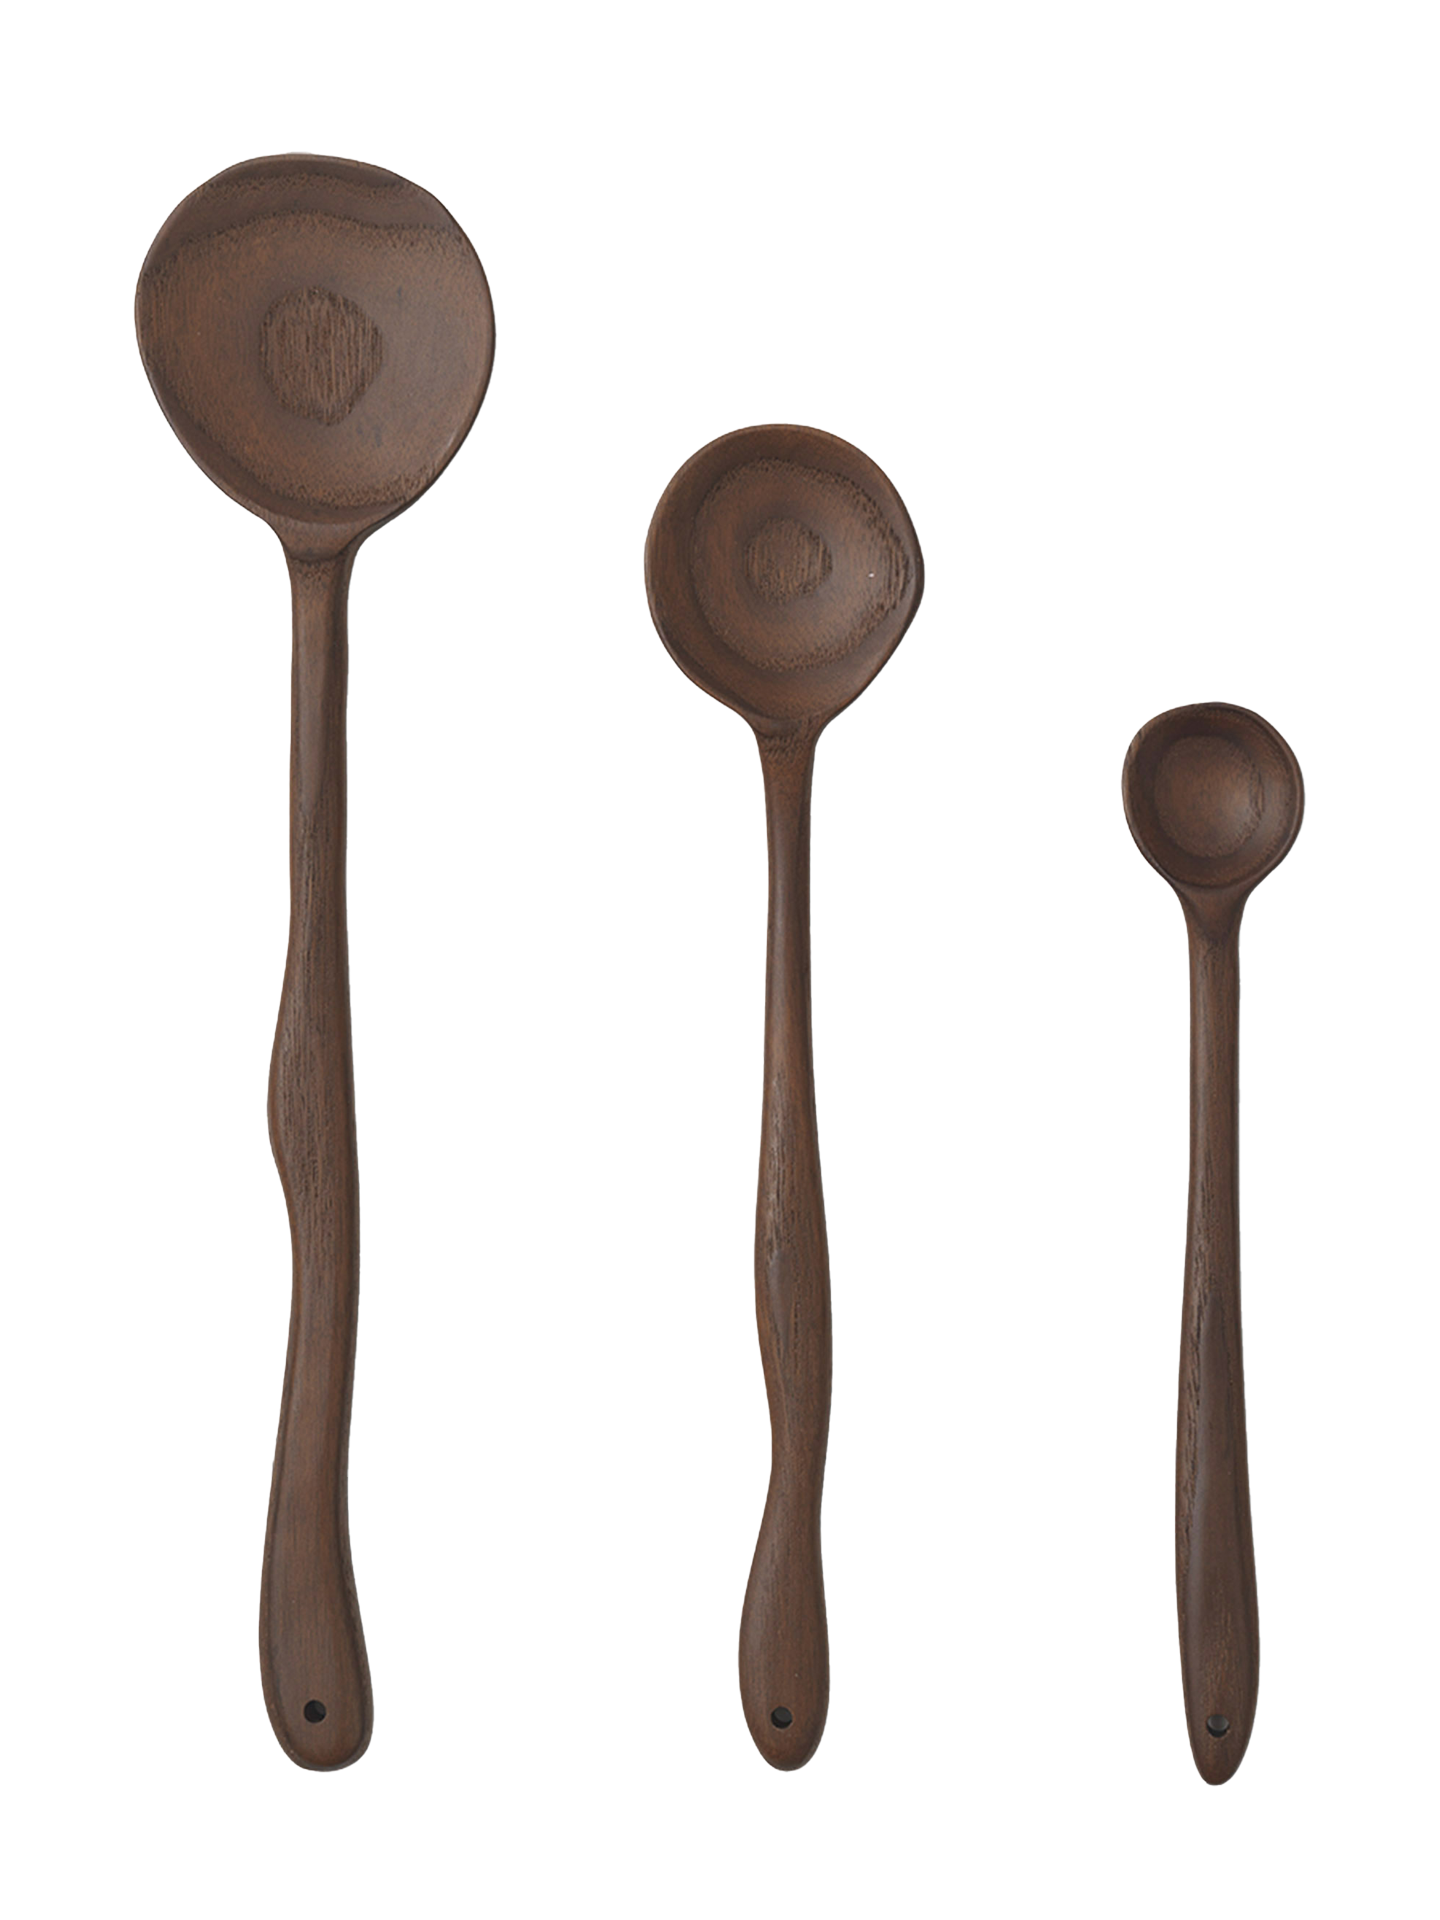 Meander spoon, 3 sizes